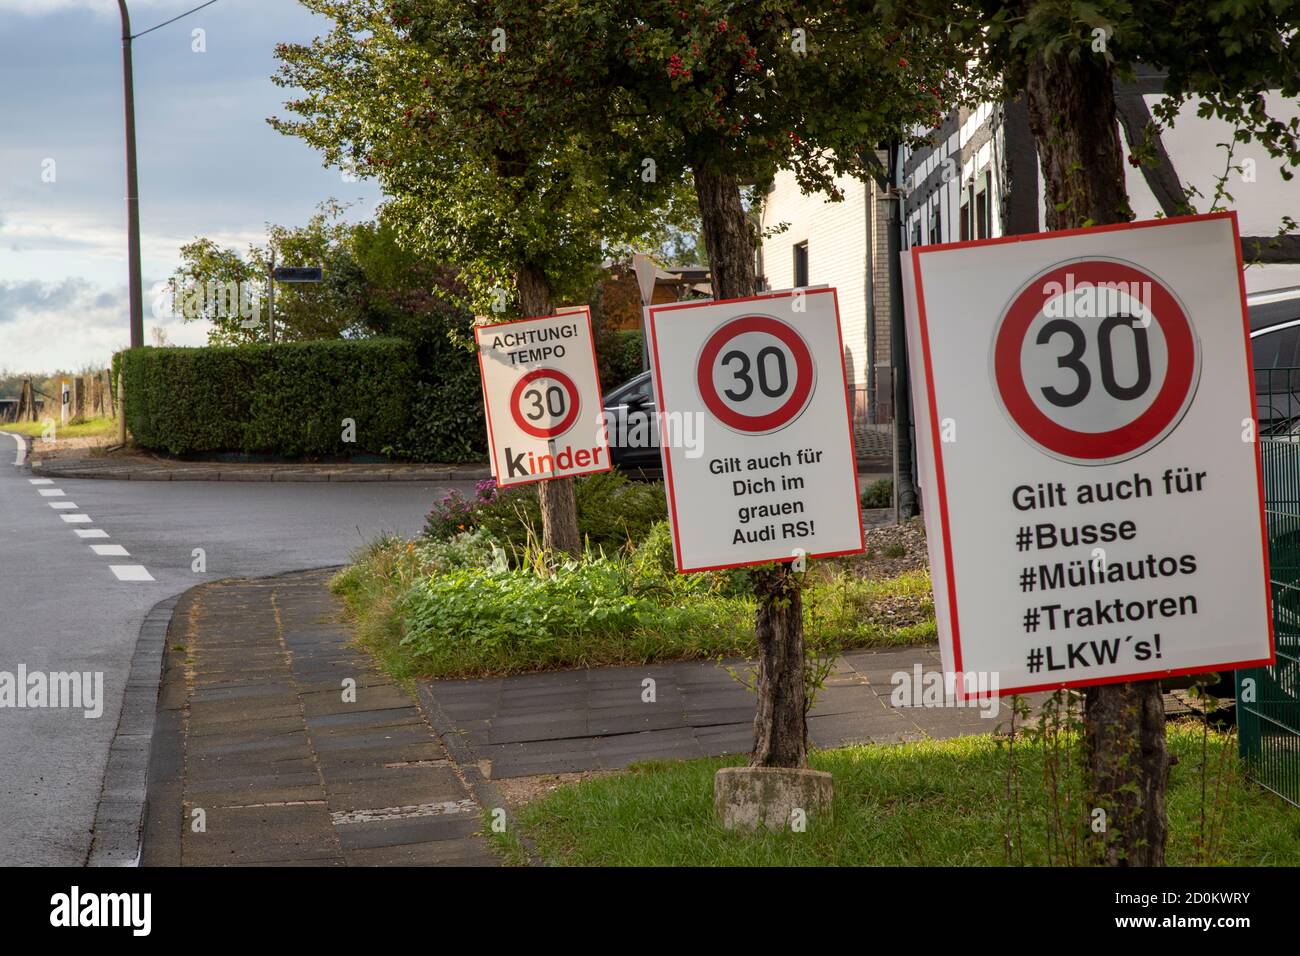 three sign boards on a village road for speed limit 30 kmh, german words pay attention for childrern, this is also for busses, trucks, catarpillars an Stock Photo